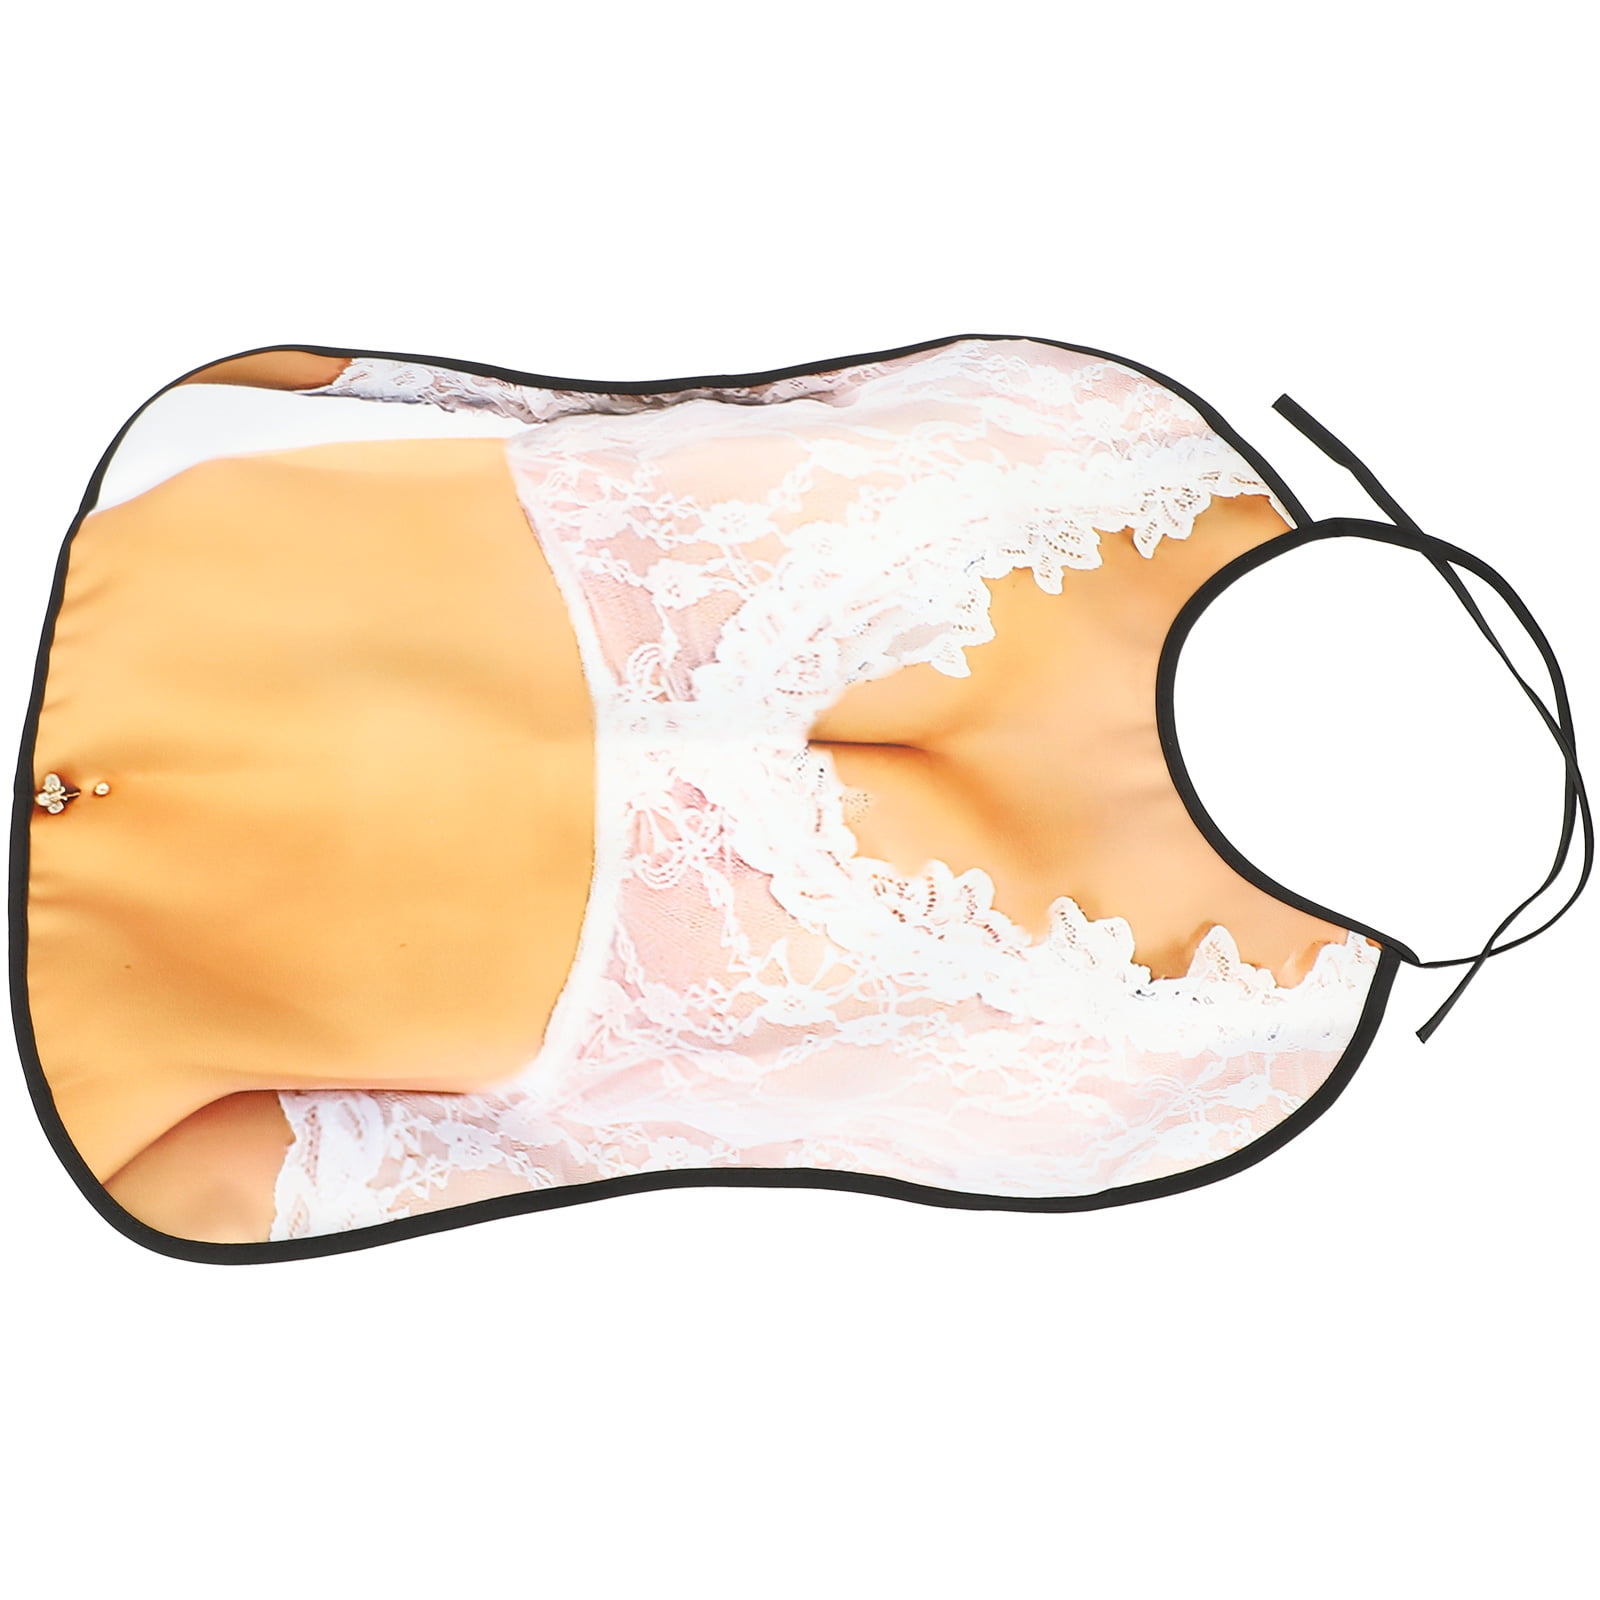 Gifts for Stocking Stuffers Drool Bibs Adult Bibs Adult Funny Bib Protector  Barbecue White Polyester (polyester Fiber) Lovers 